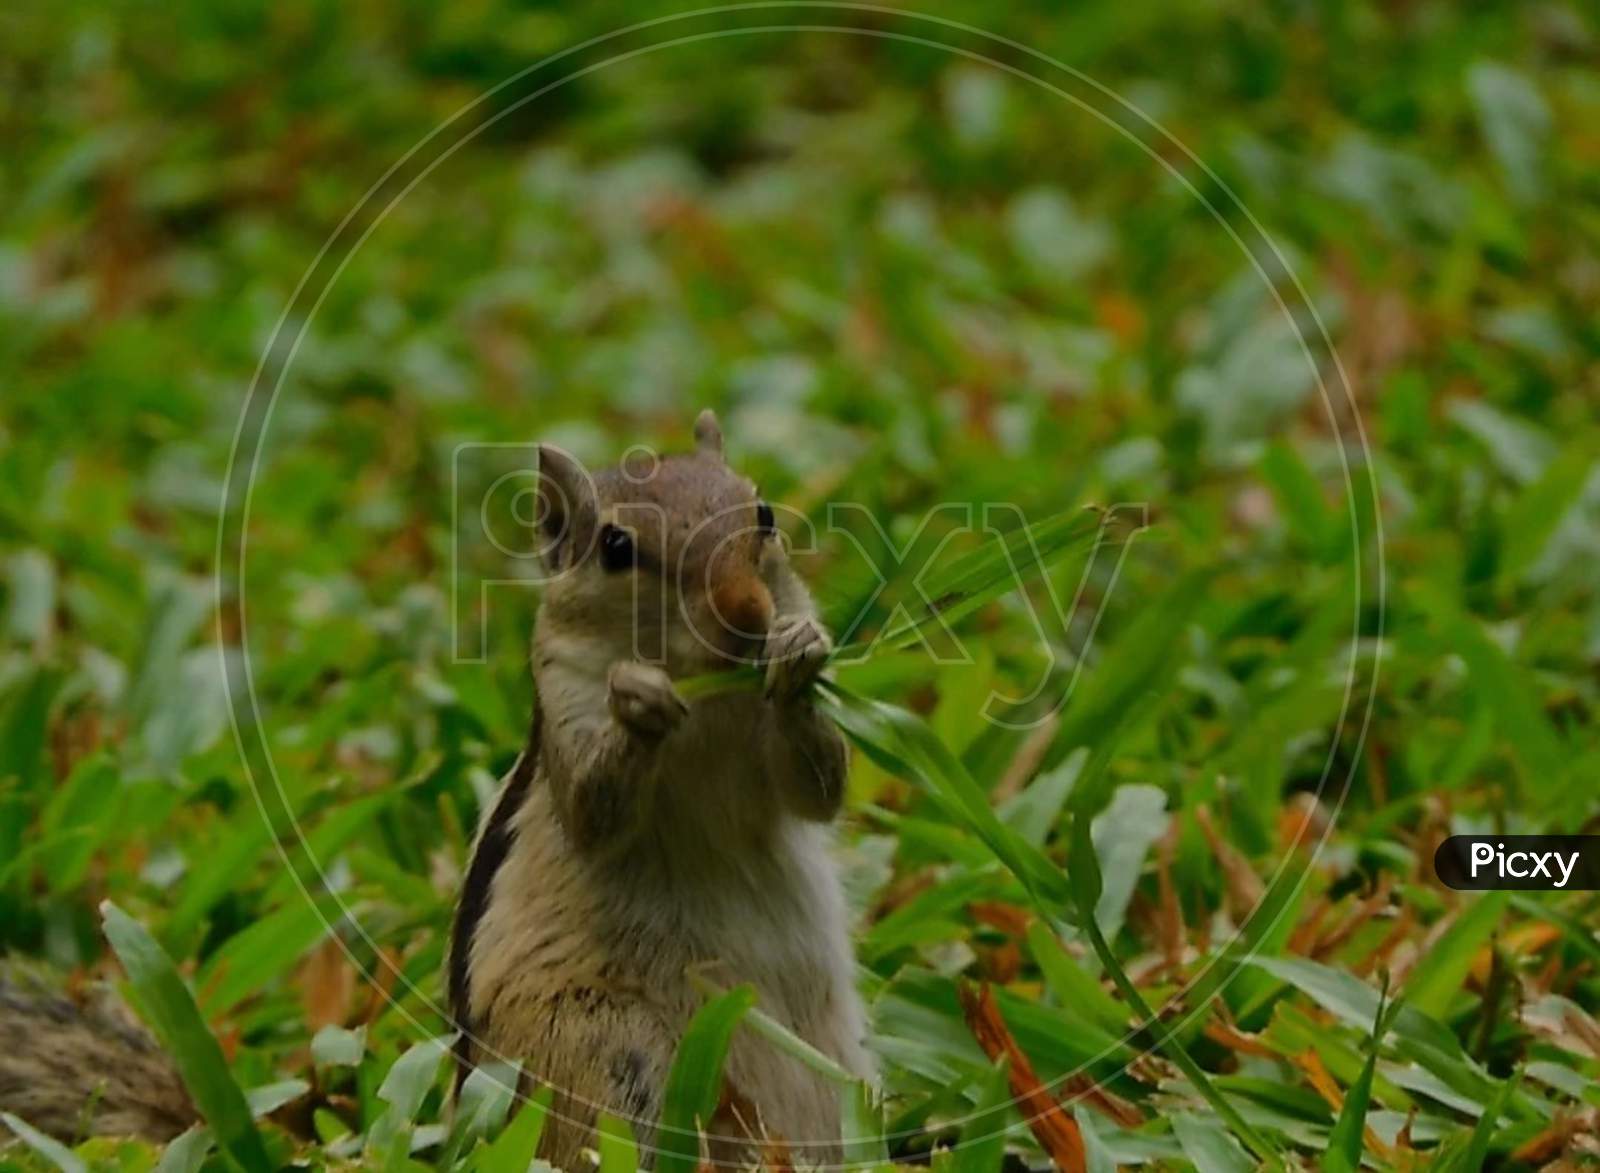 Squirrel eating grass